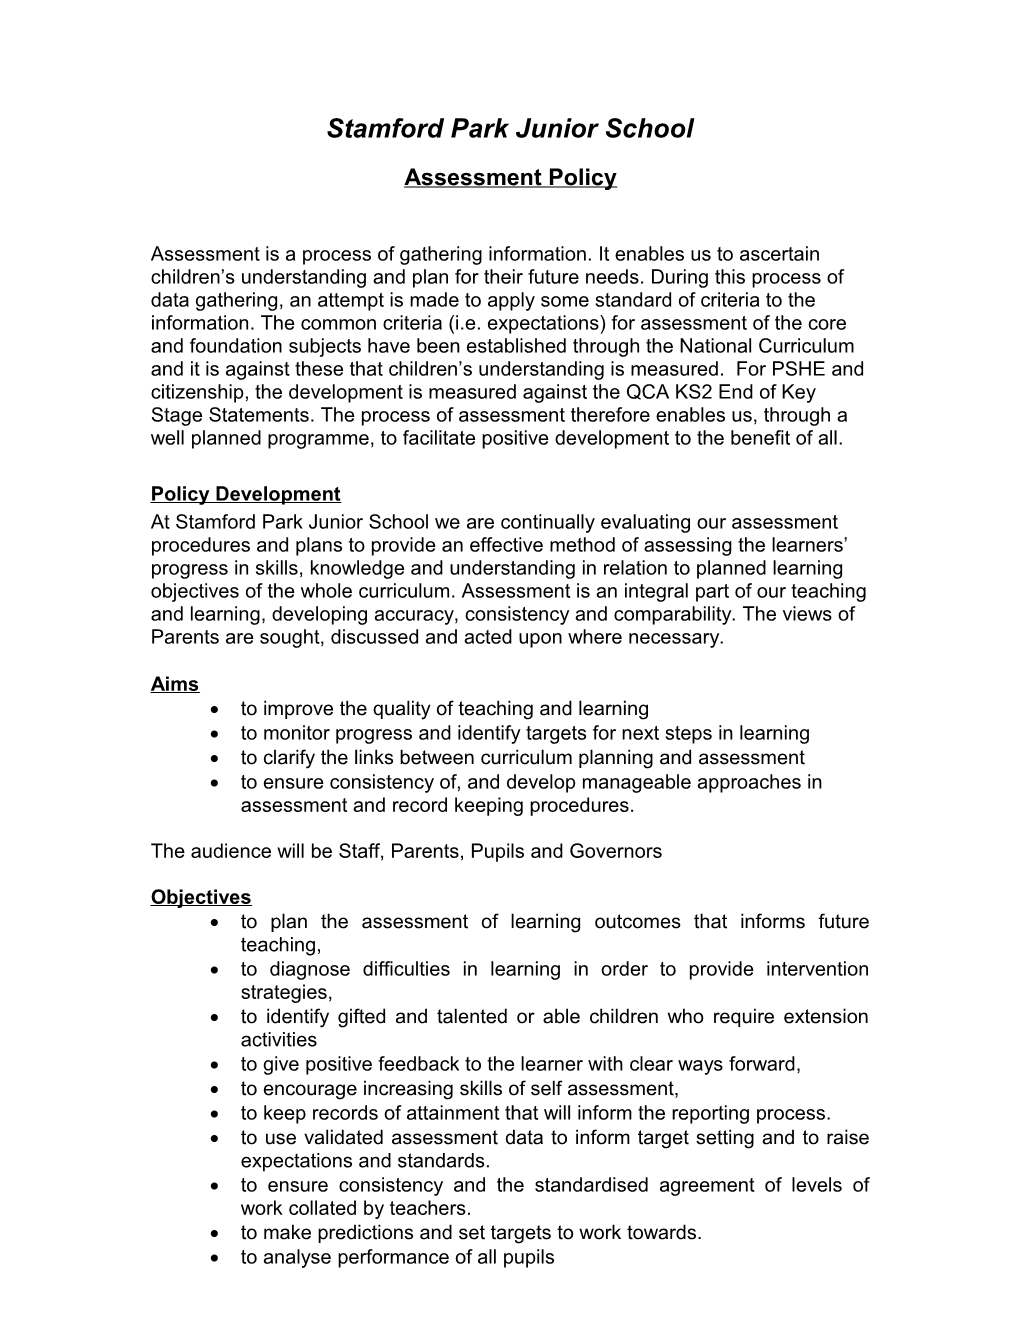 Assessment Policy Statement